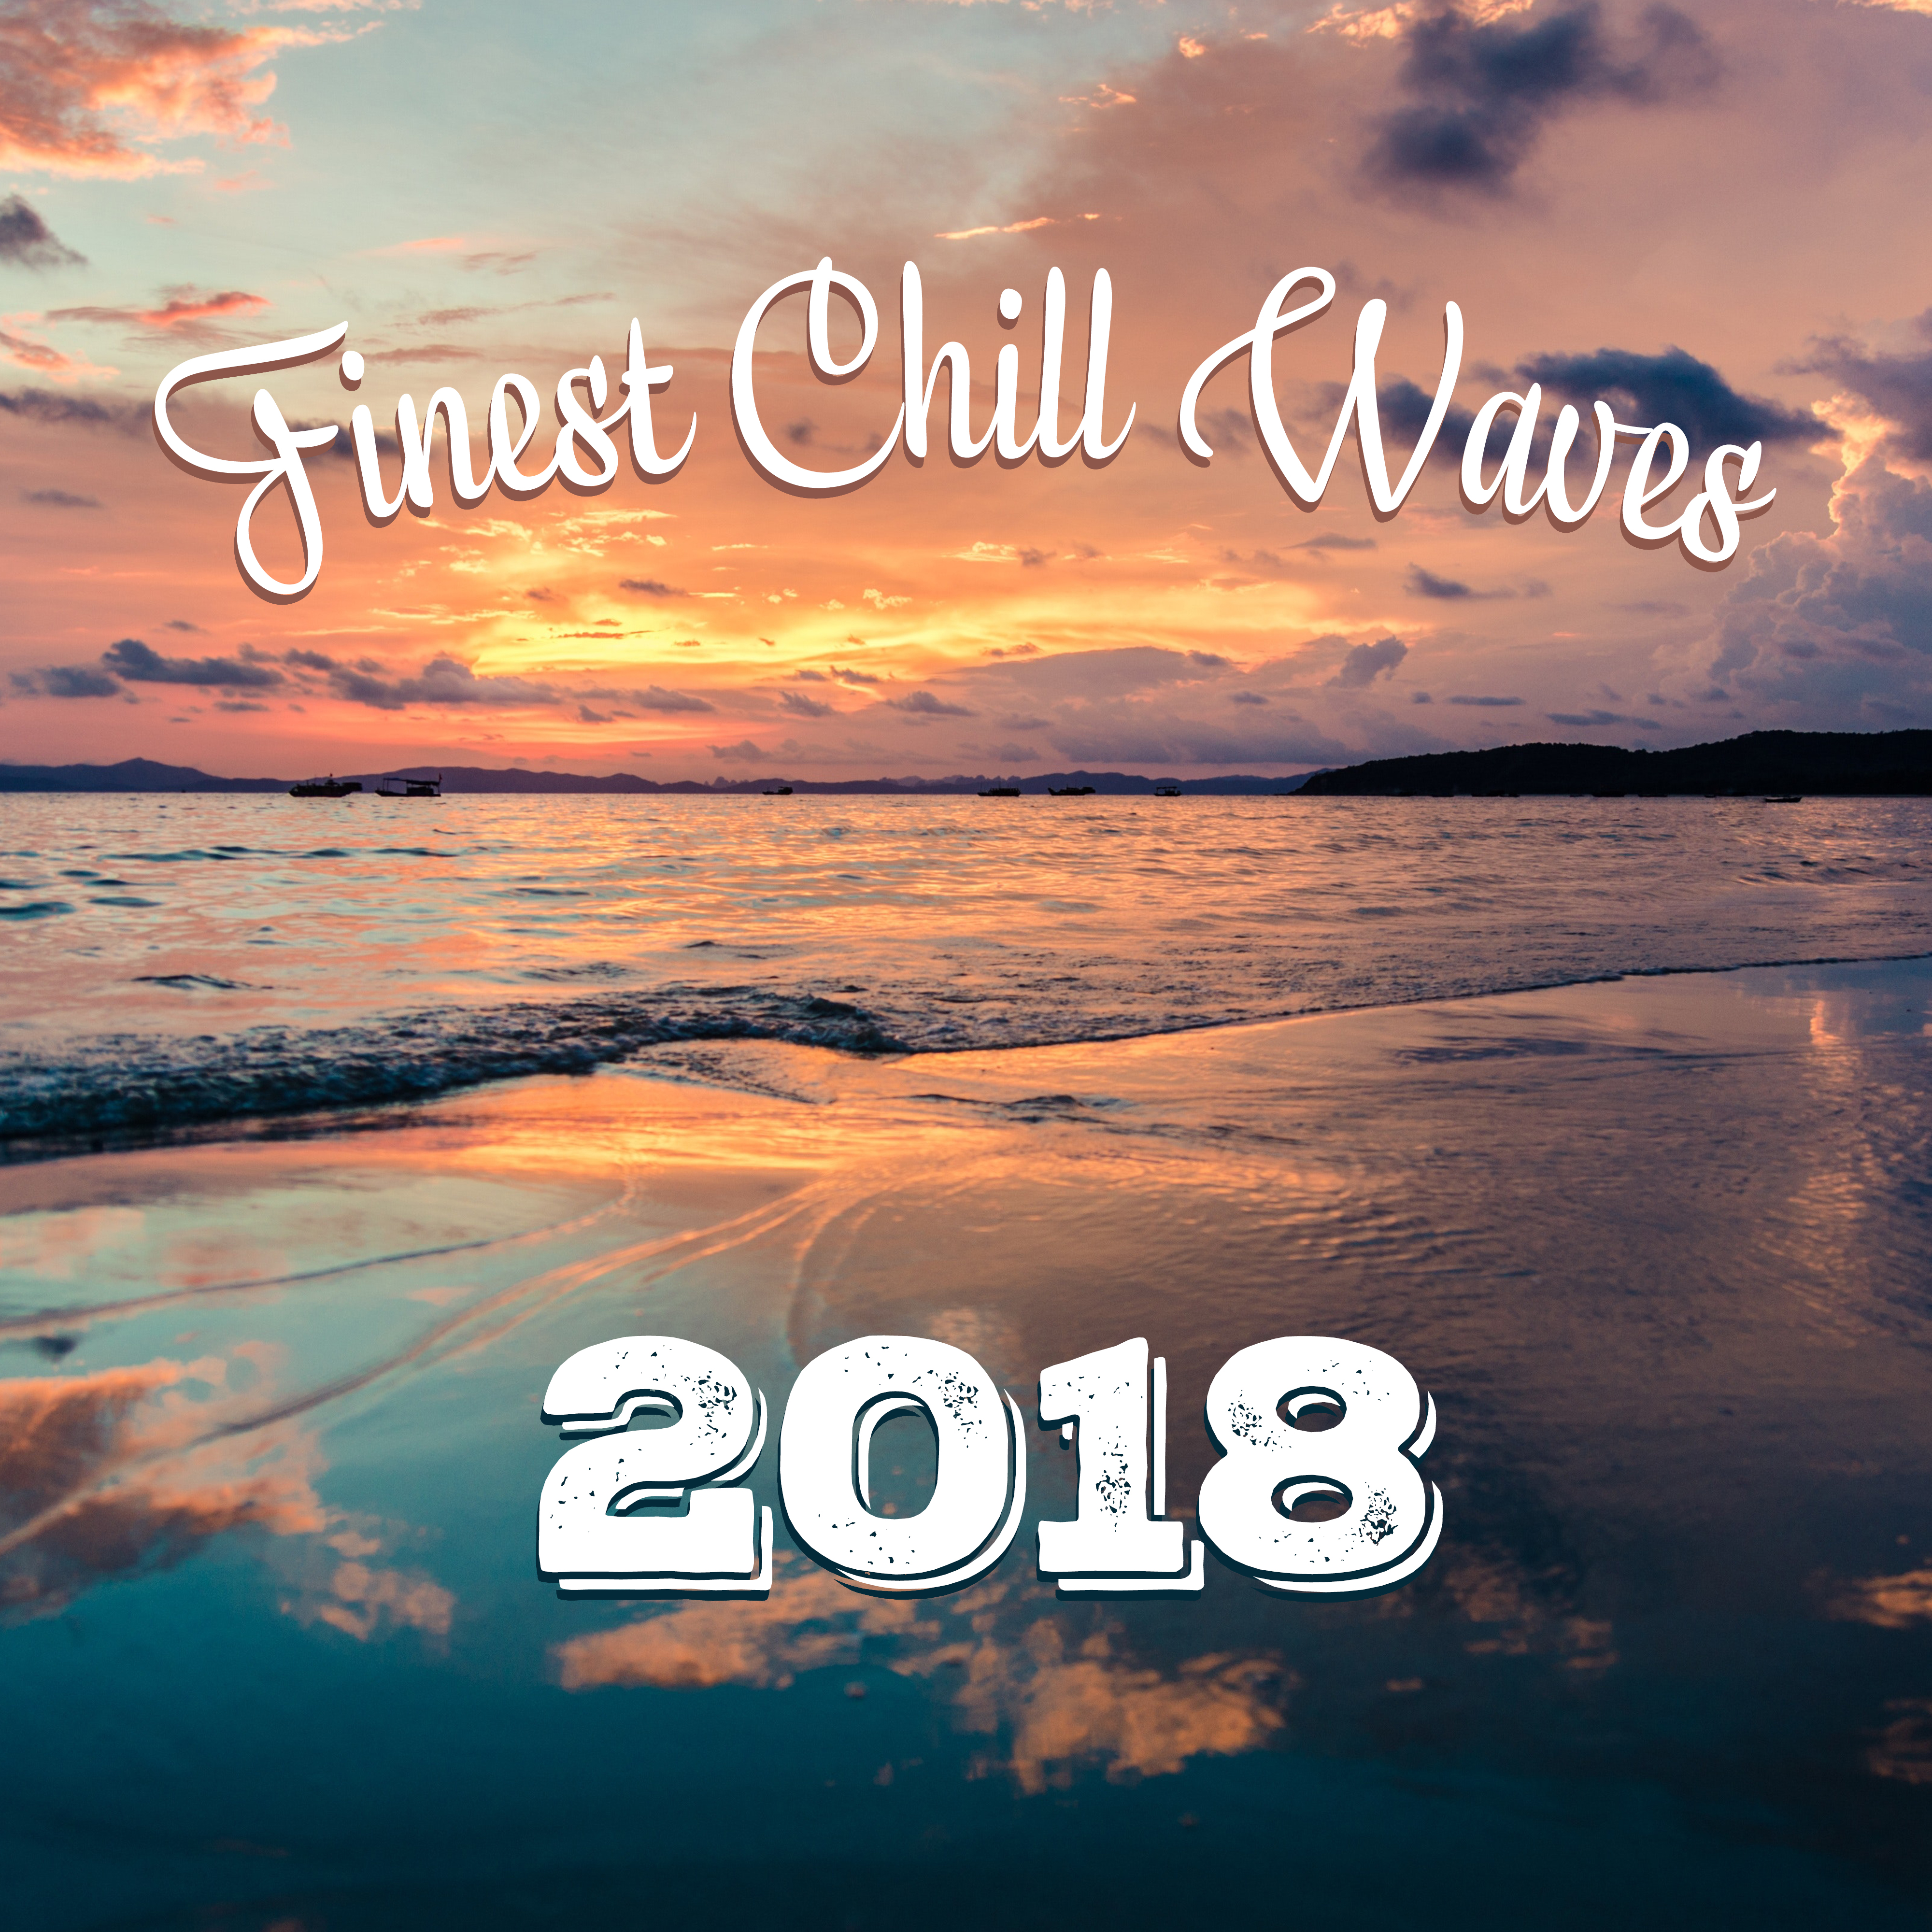 Finest Chill Waves 2018